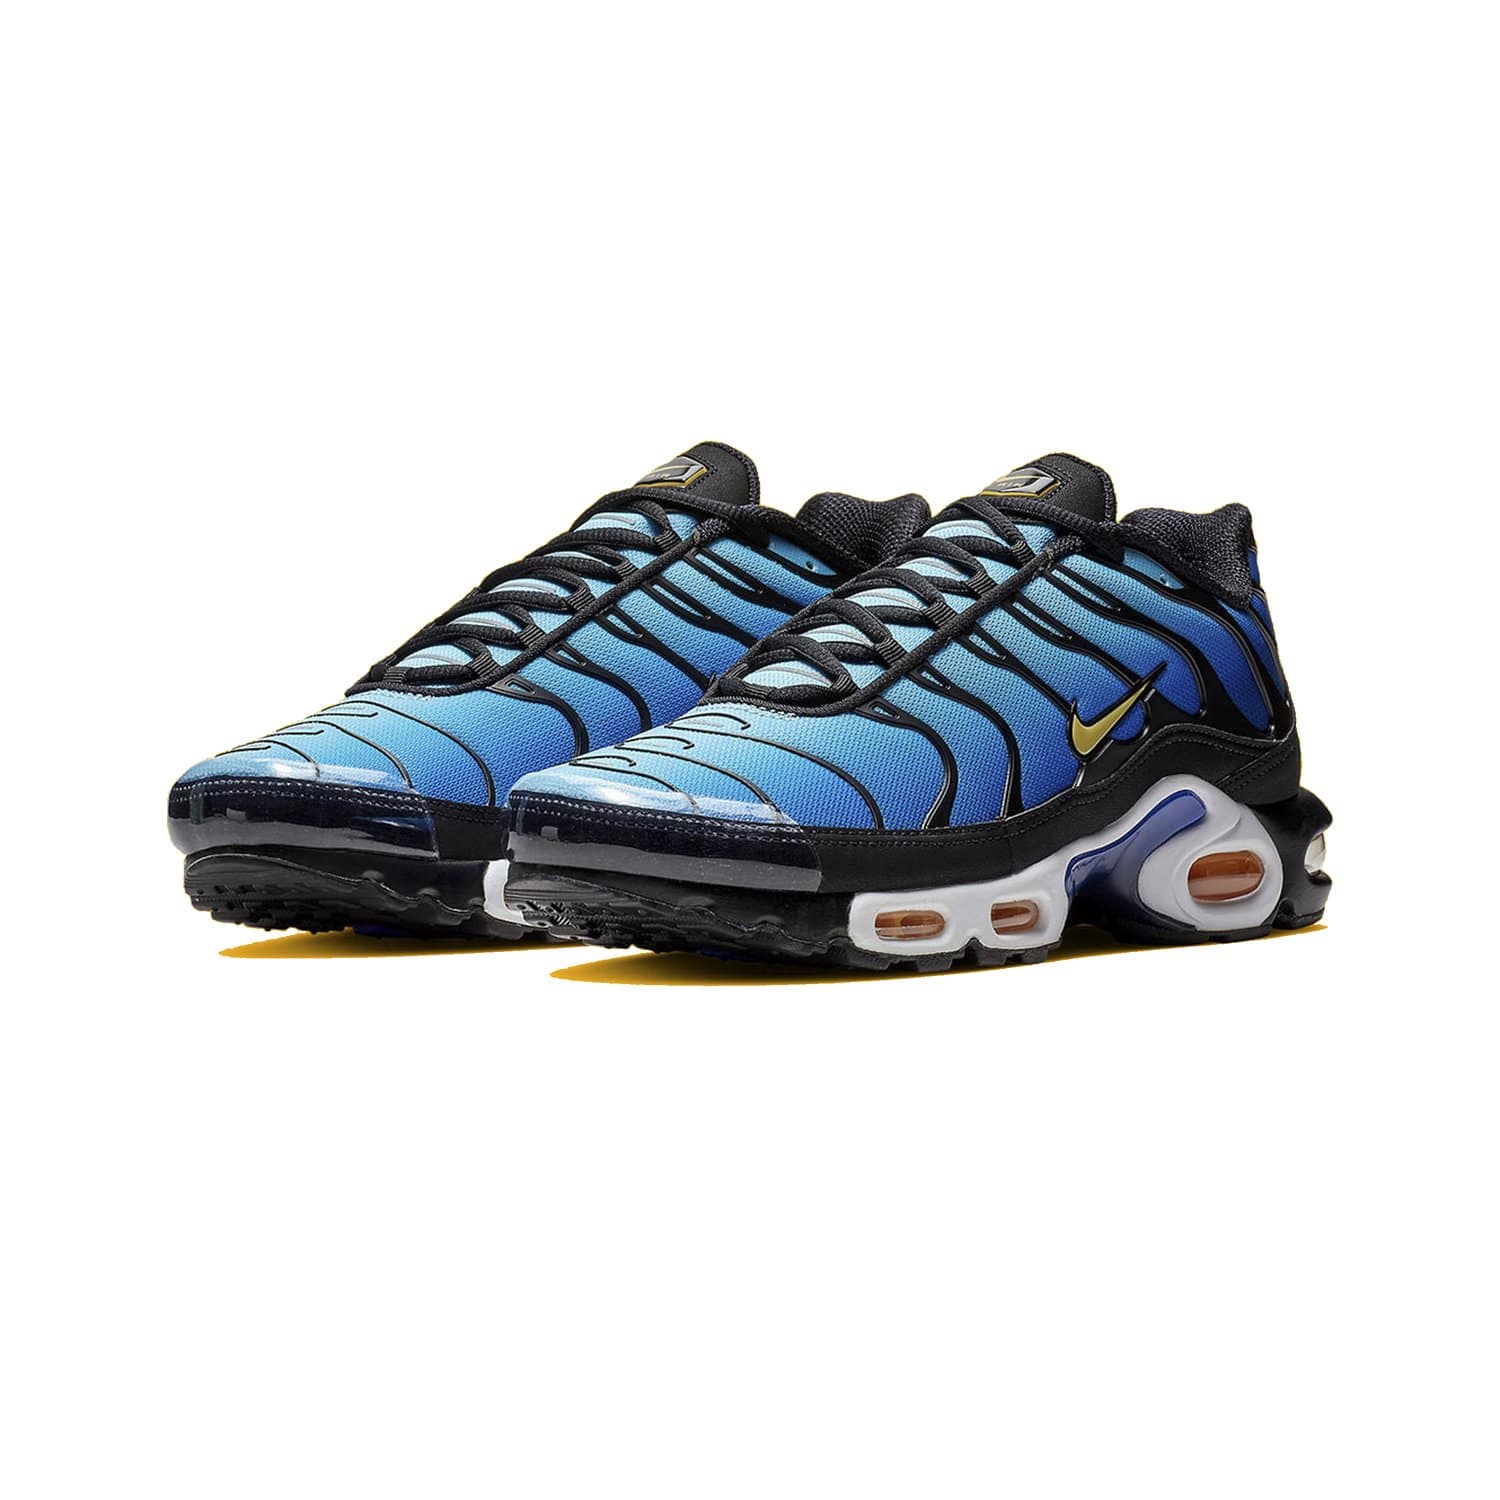 What health compression Air Max Plus AND HYPER BLUE - ibuysneakers